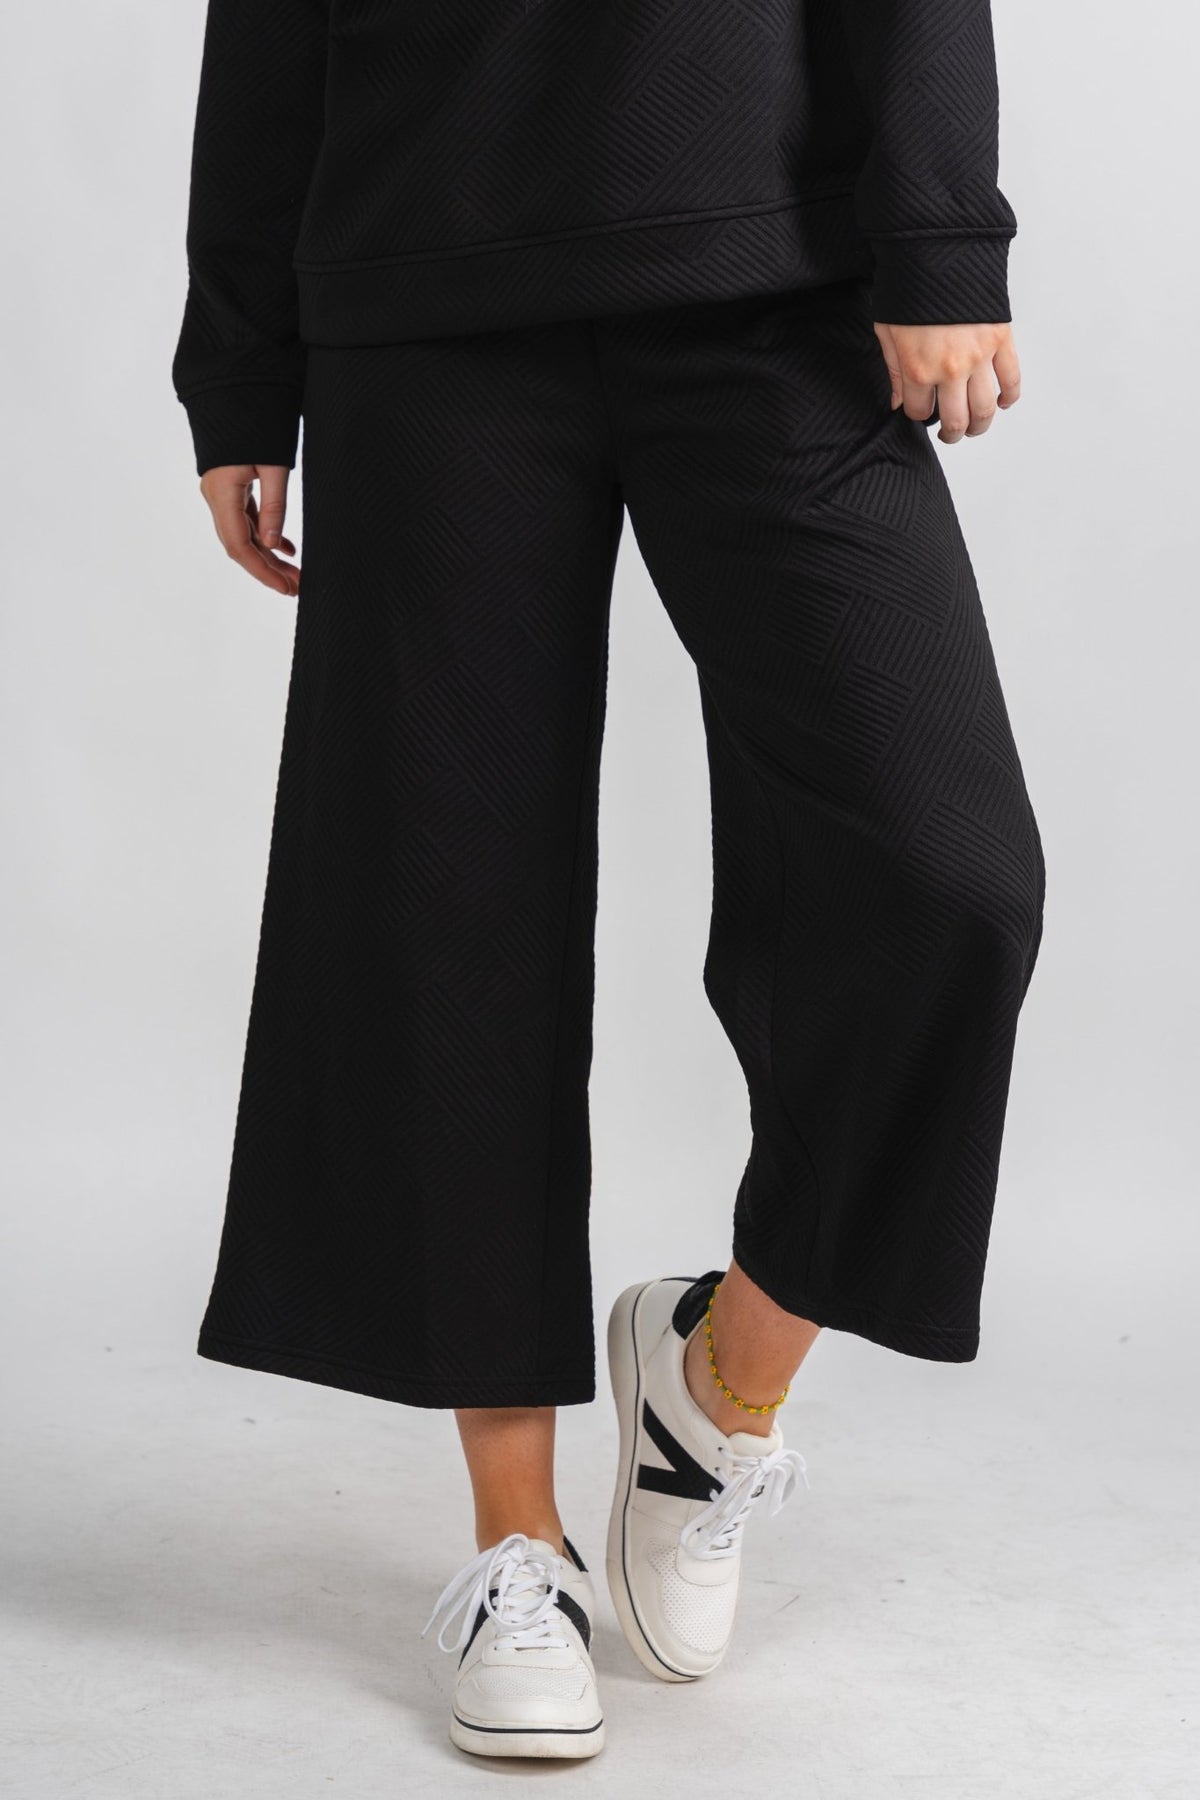 Textured crop pants black - Trendy Pants - Cute Loungewear Collection at Lush Fashion Lounge Boutique in Oklahoma City